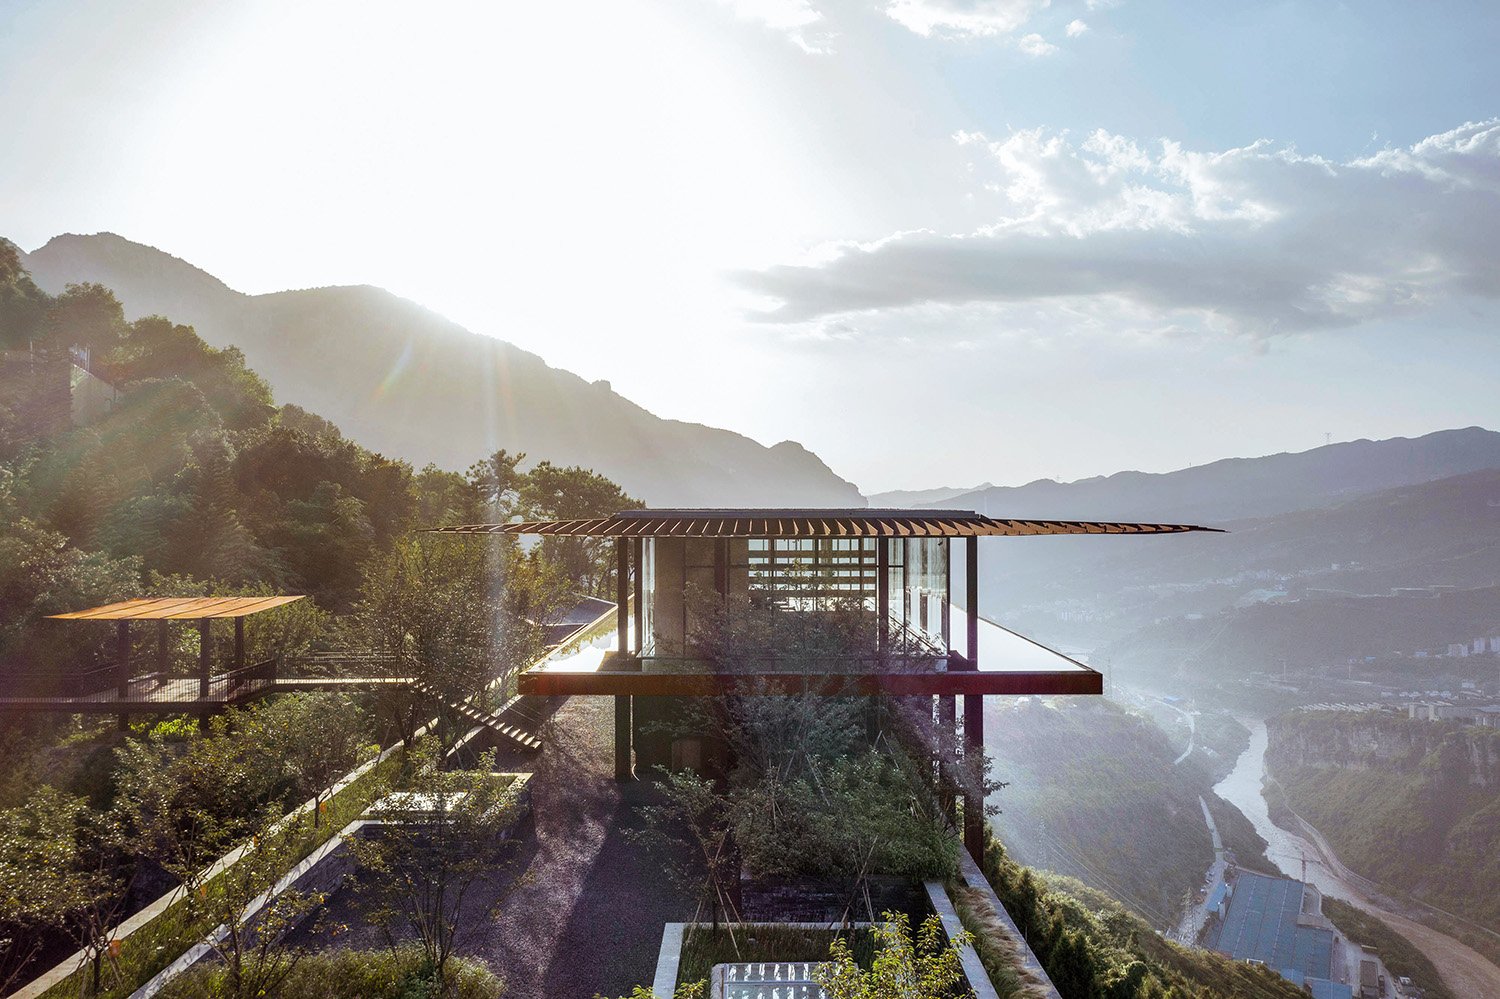 Liquor Tasting Pavilion Surrounded by Water with a Panoramic View | Arch-Exist